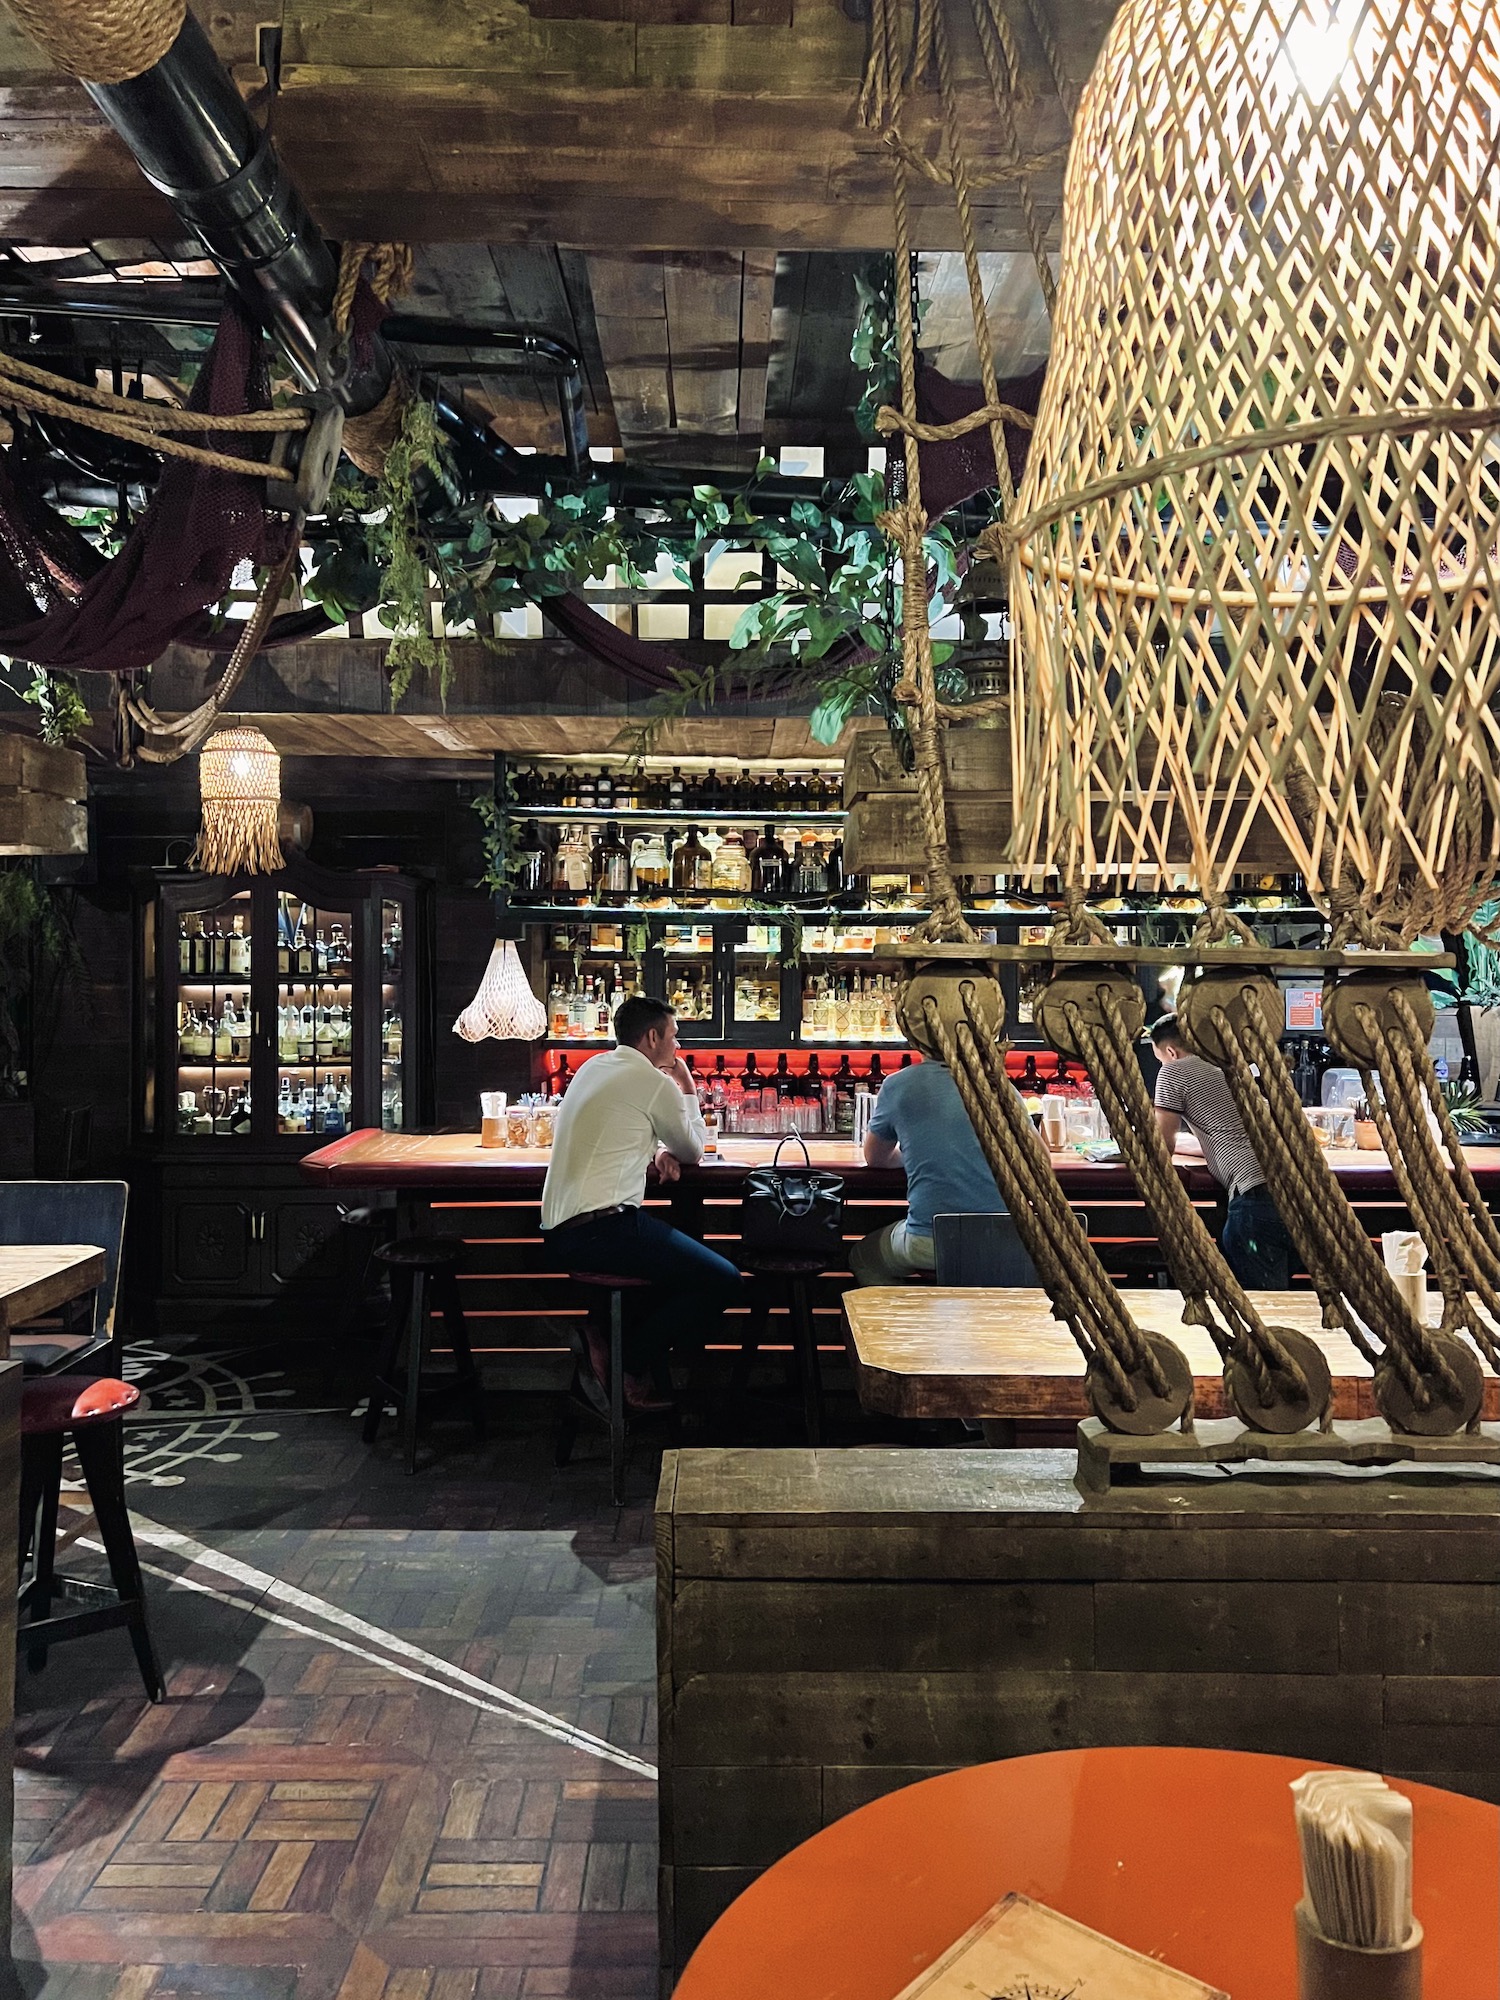 Featuring wooden barrels and nautical ropes, Buccaneers Rum & Kitchen is a masterclass in fully embracing themed interiors, says JJ Acuña